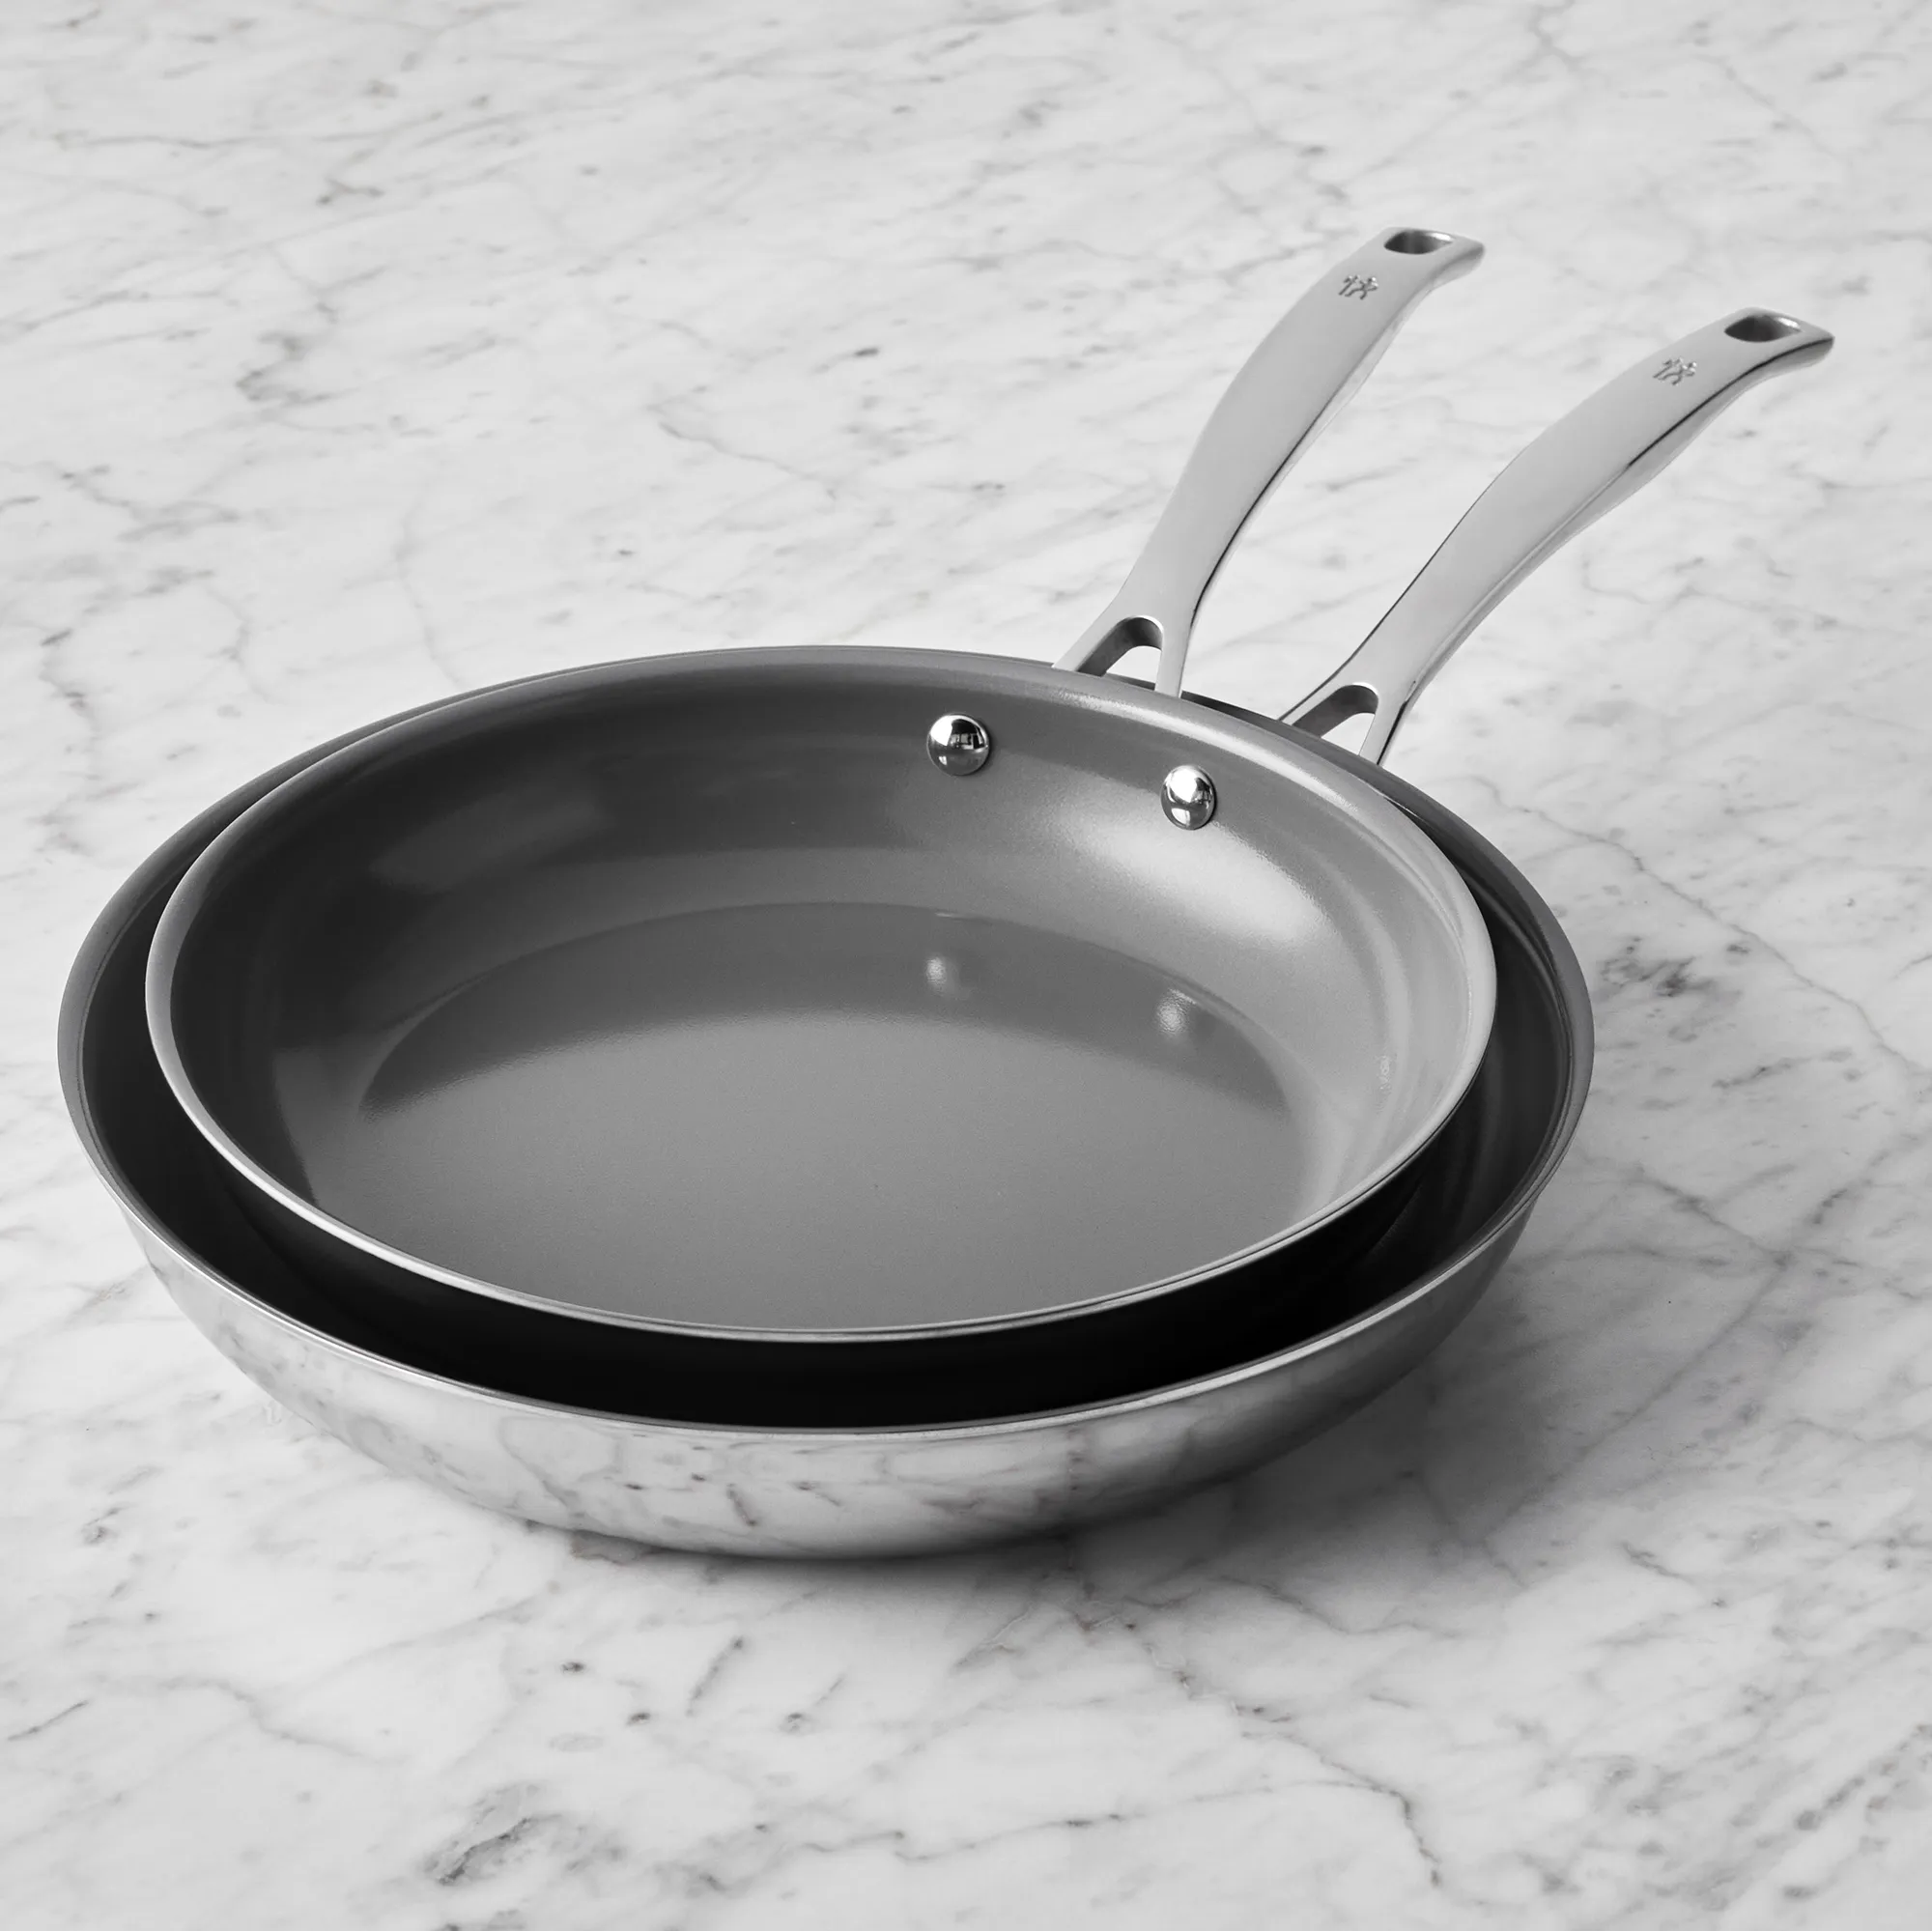 Zwilling Clad CFX 2-pc Stainless Steel Ceramic Nonstick Fry Pan with Lid